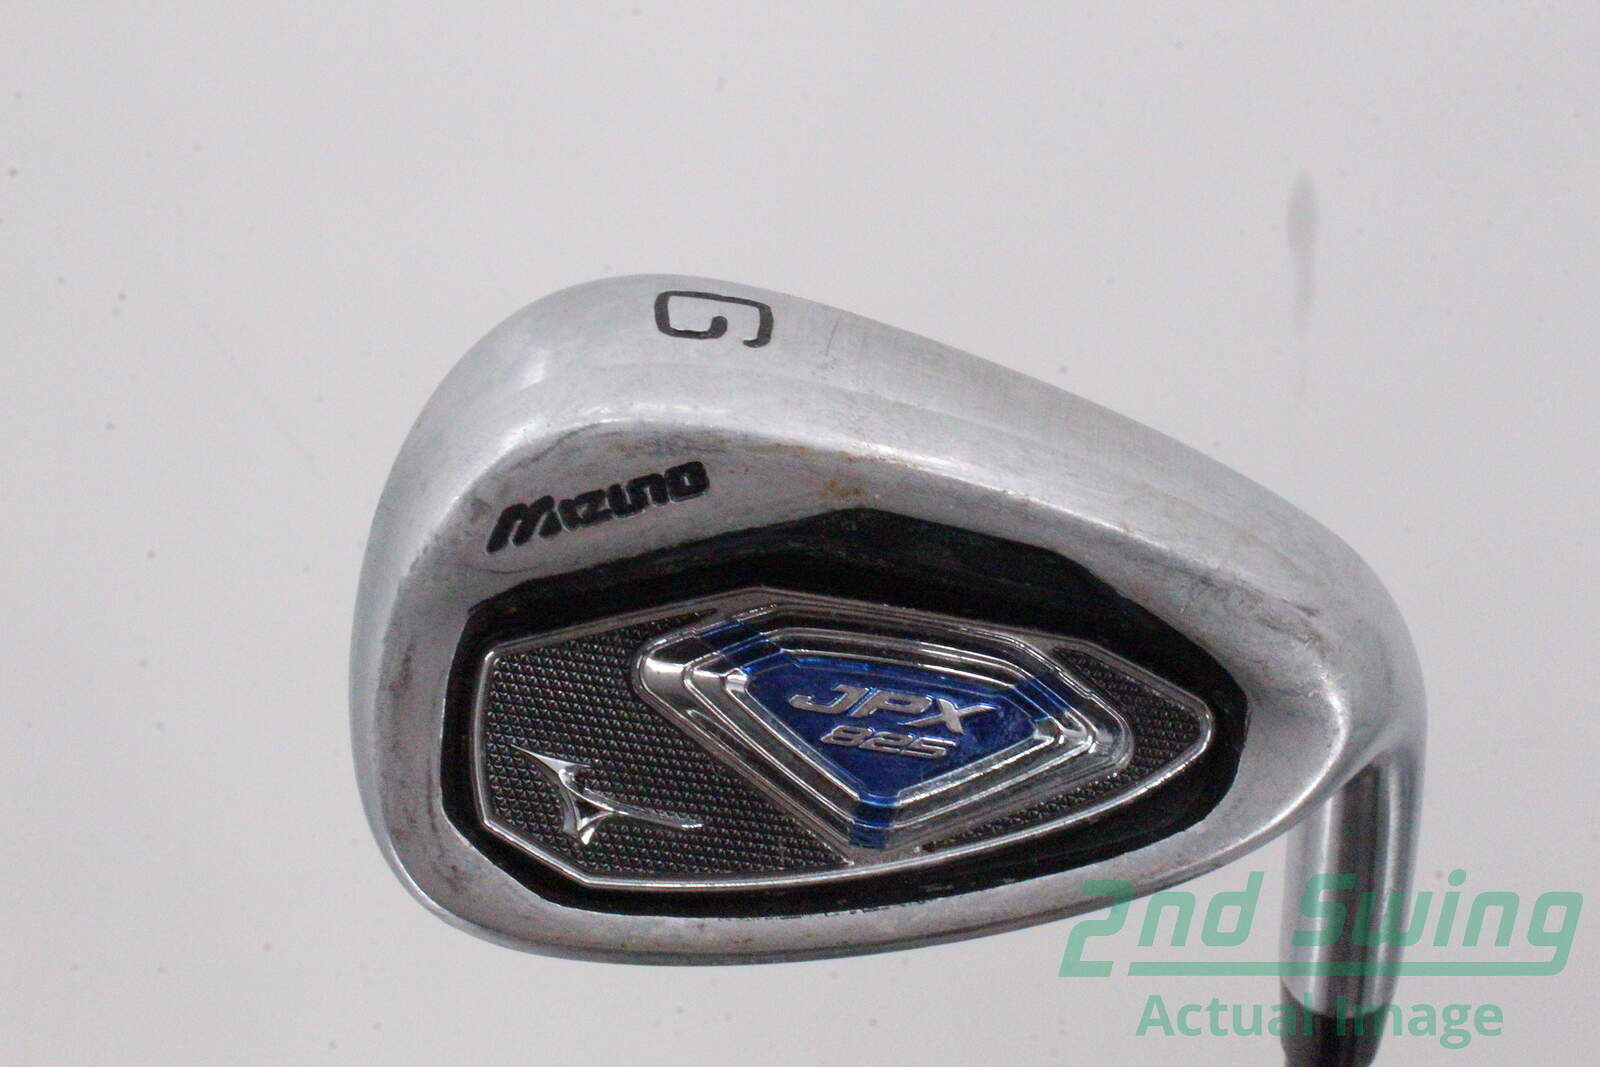 used mizuno jpx 825 irons for sale